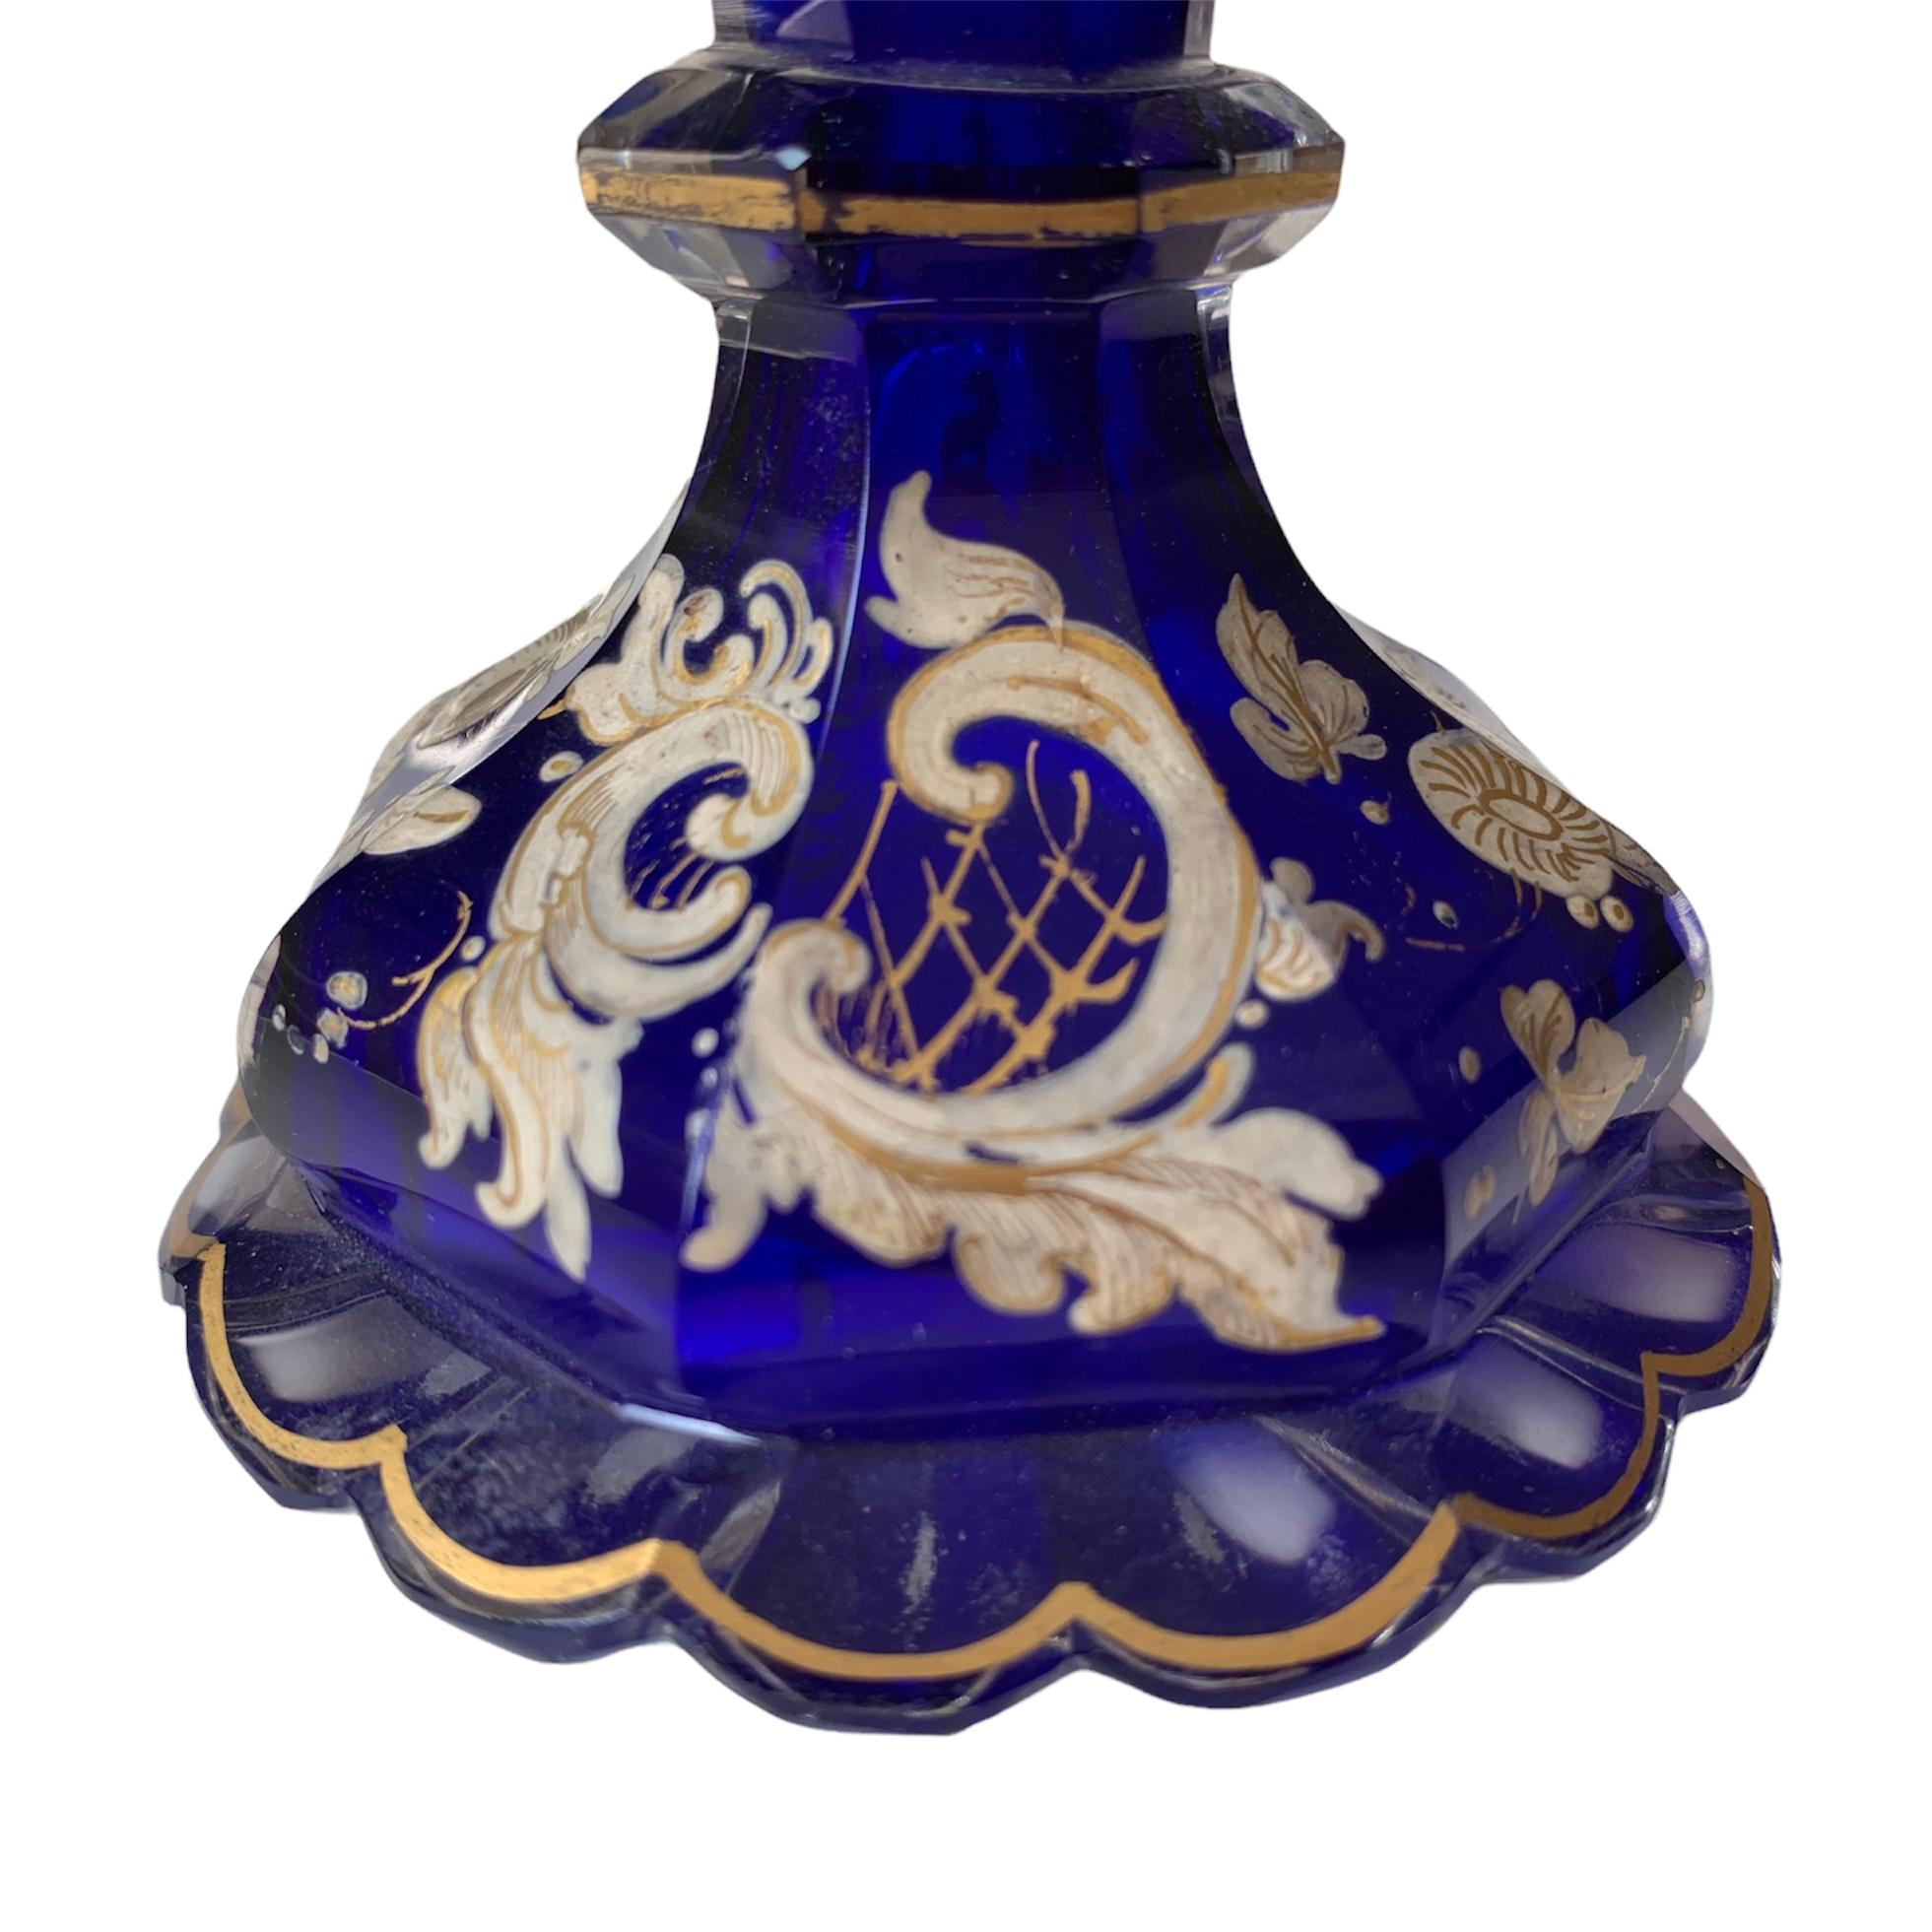 Antique Bohemian Glass Perfume Bottle, Flacon, 19th Century In Good Condition For Sale In Rostock, MV